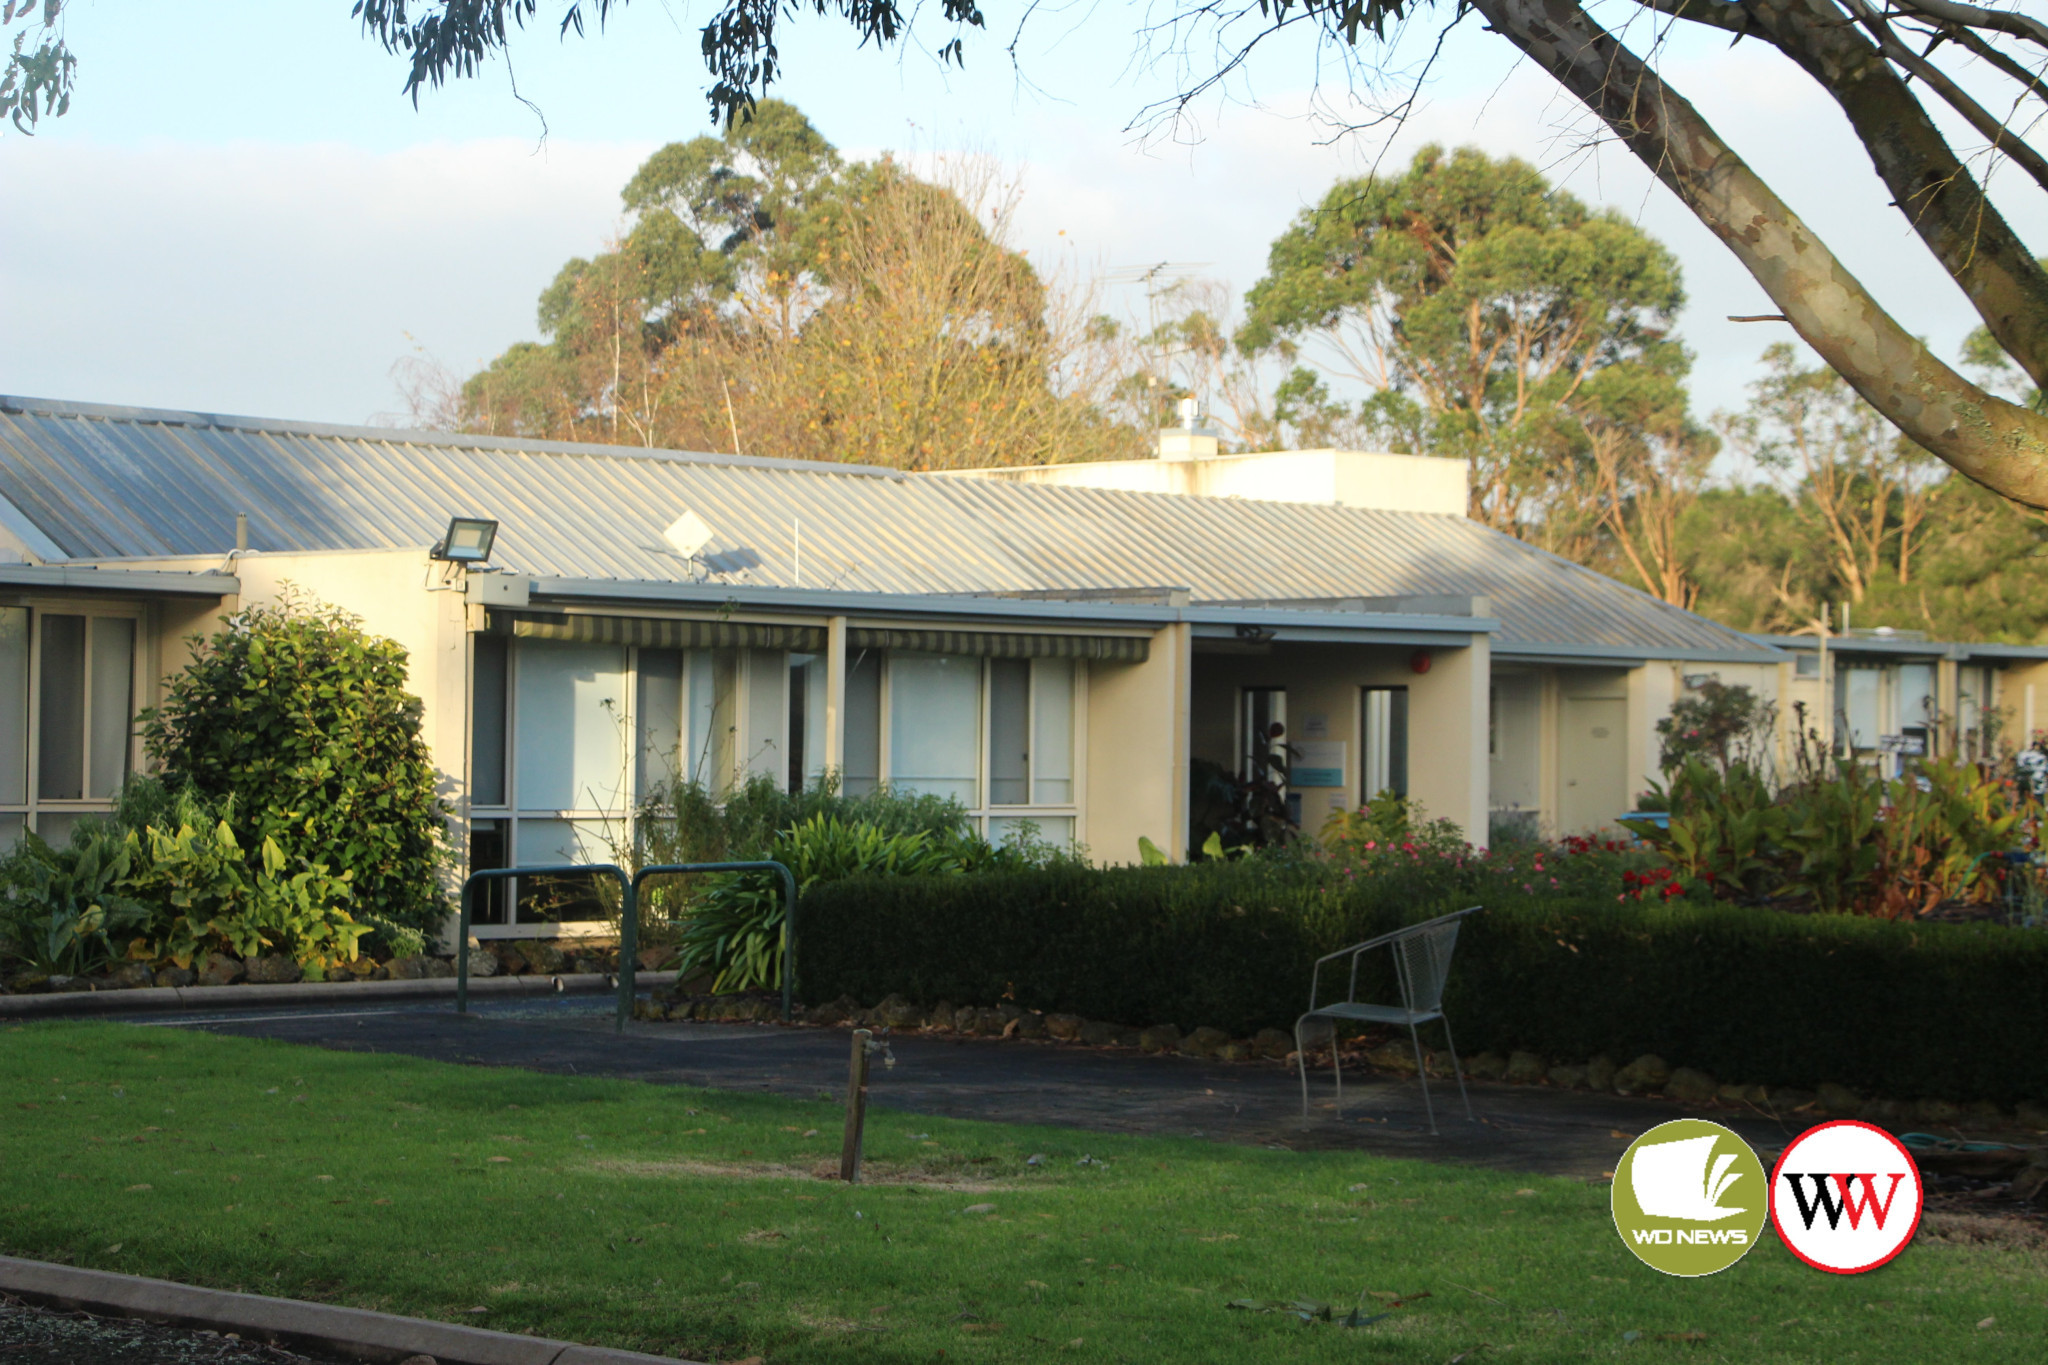 Former May Noonan Aged Care Centre in Terang.